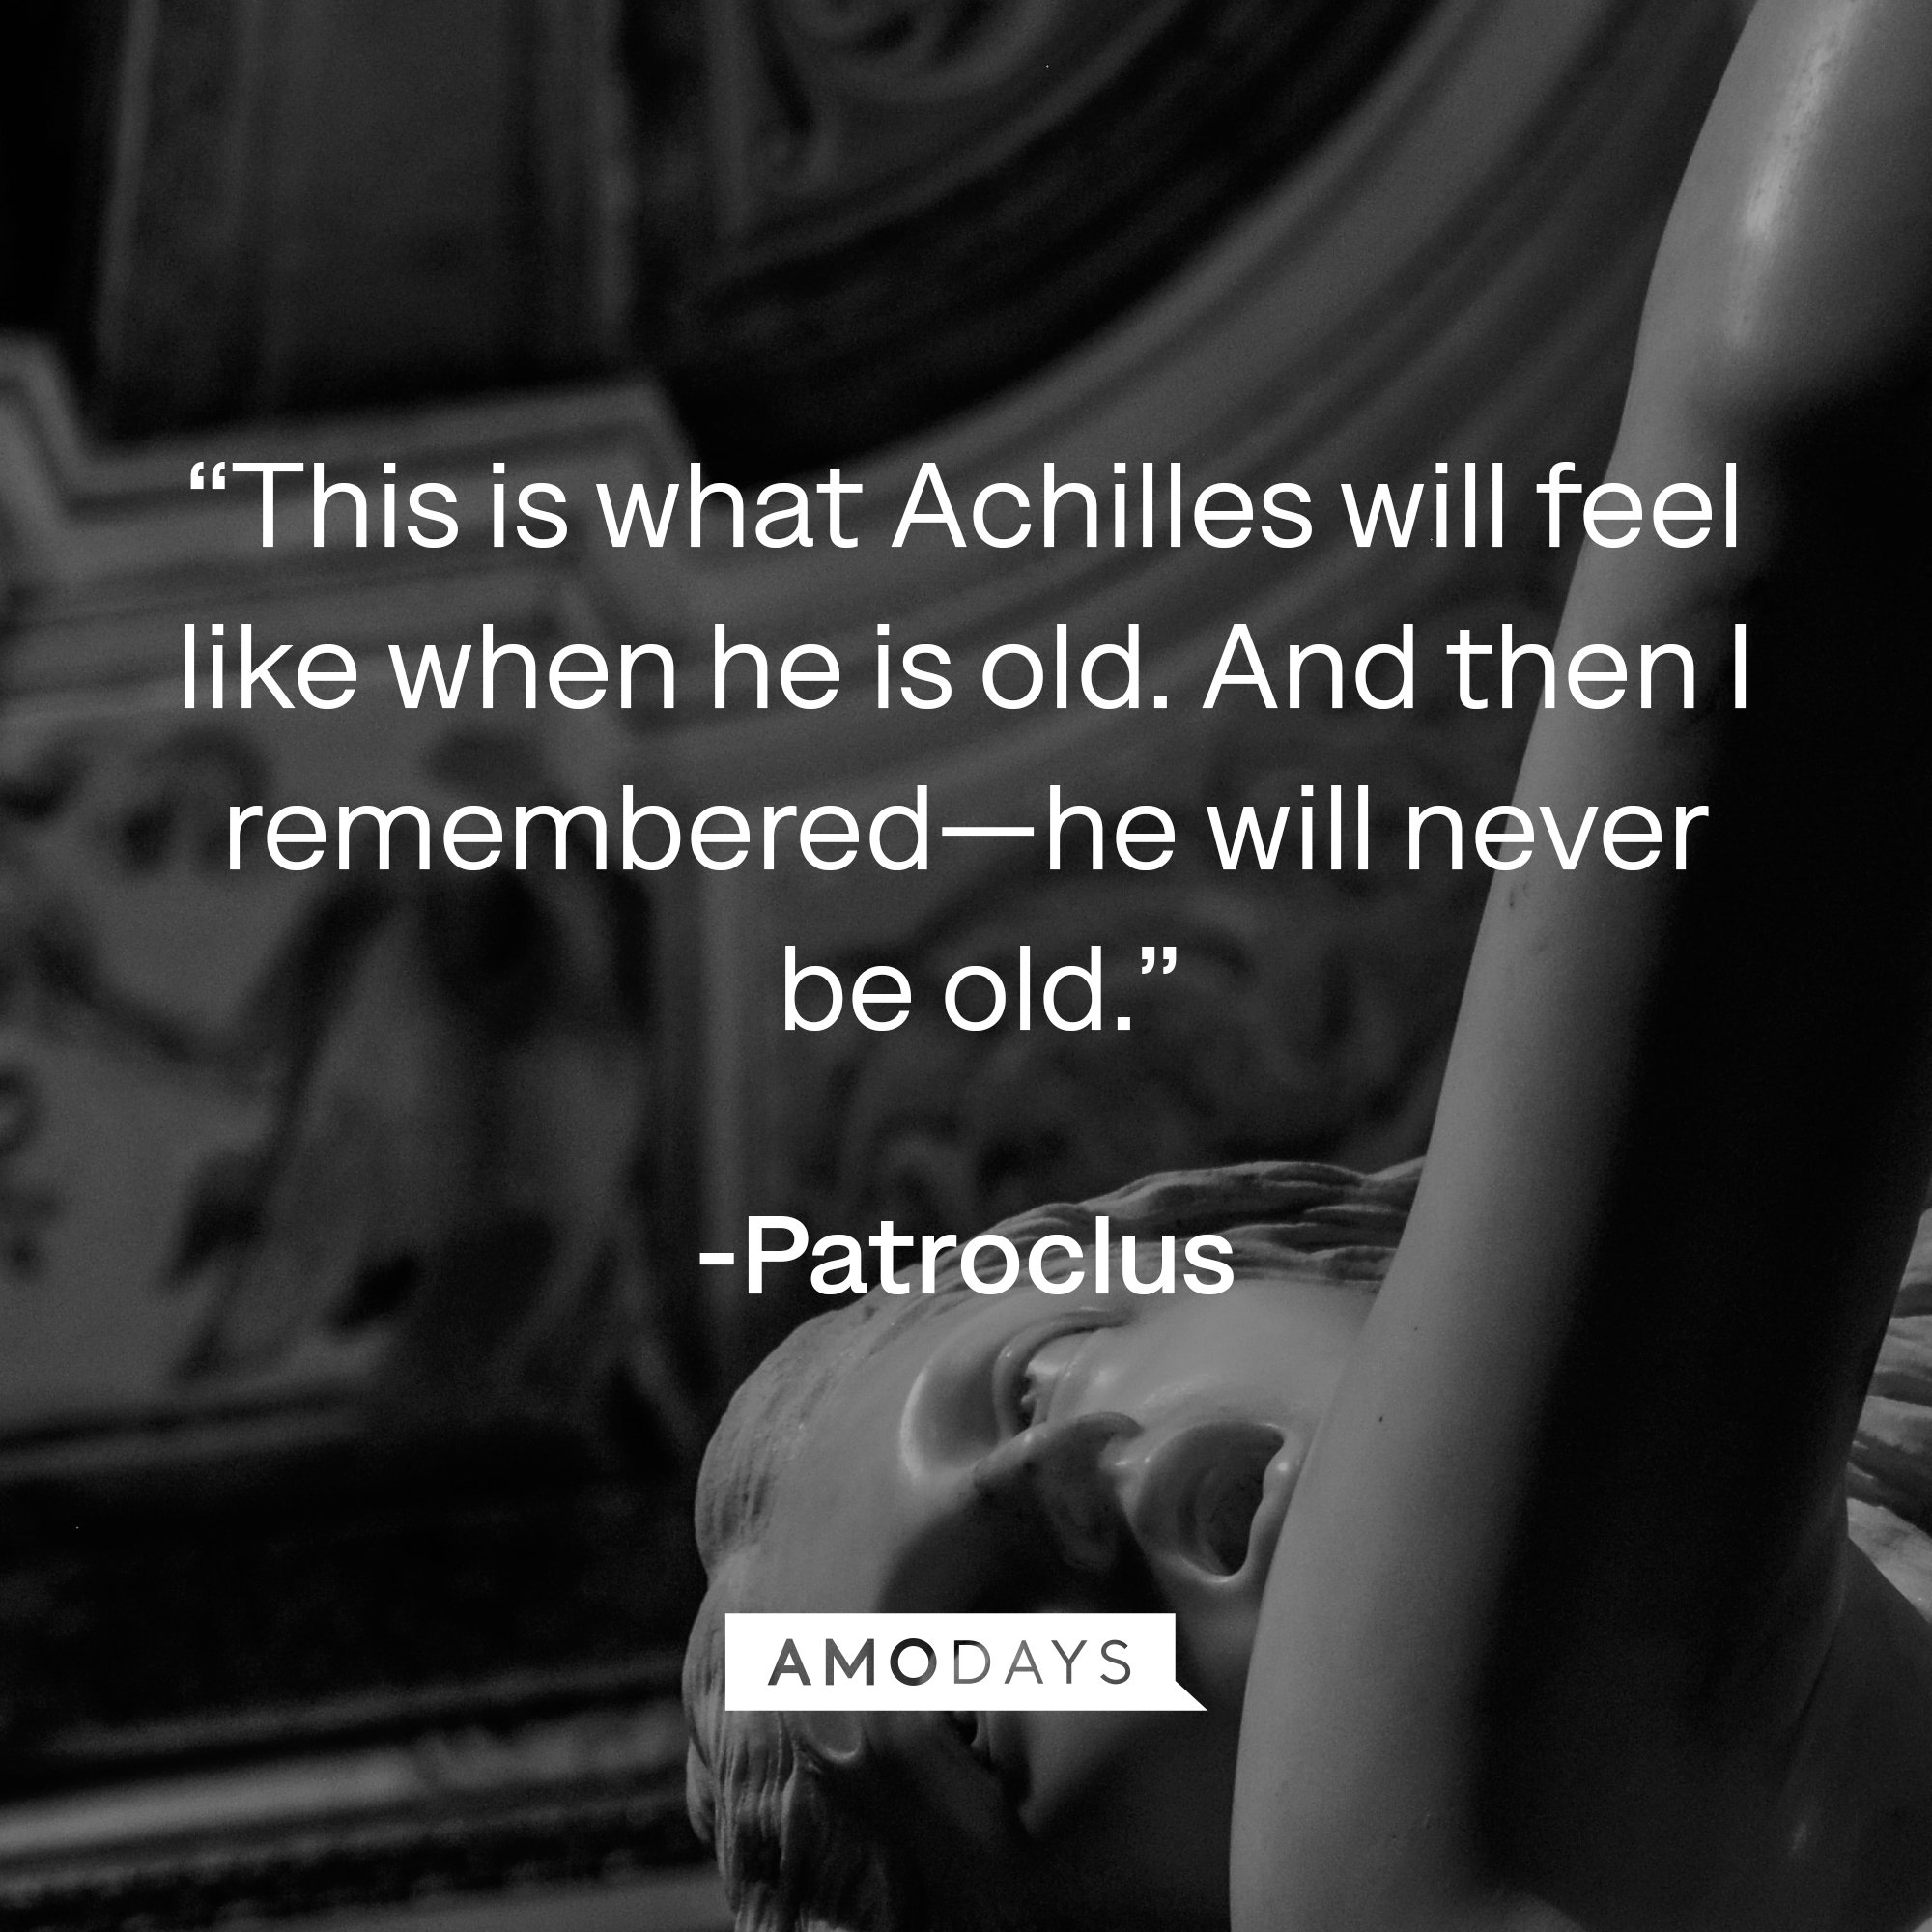 Patroclus's quote: “This is what Achilles will feel like when he is old. And then I remembered — he will never be old.” | Image: AmoDays